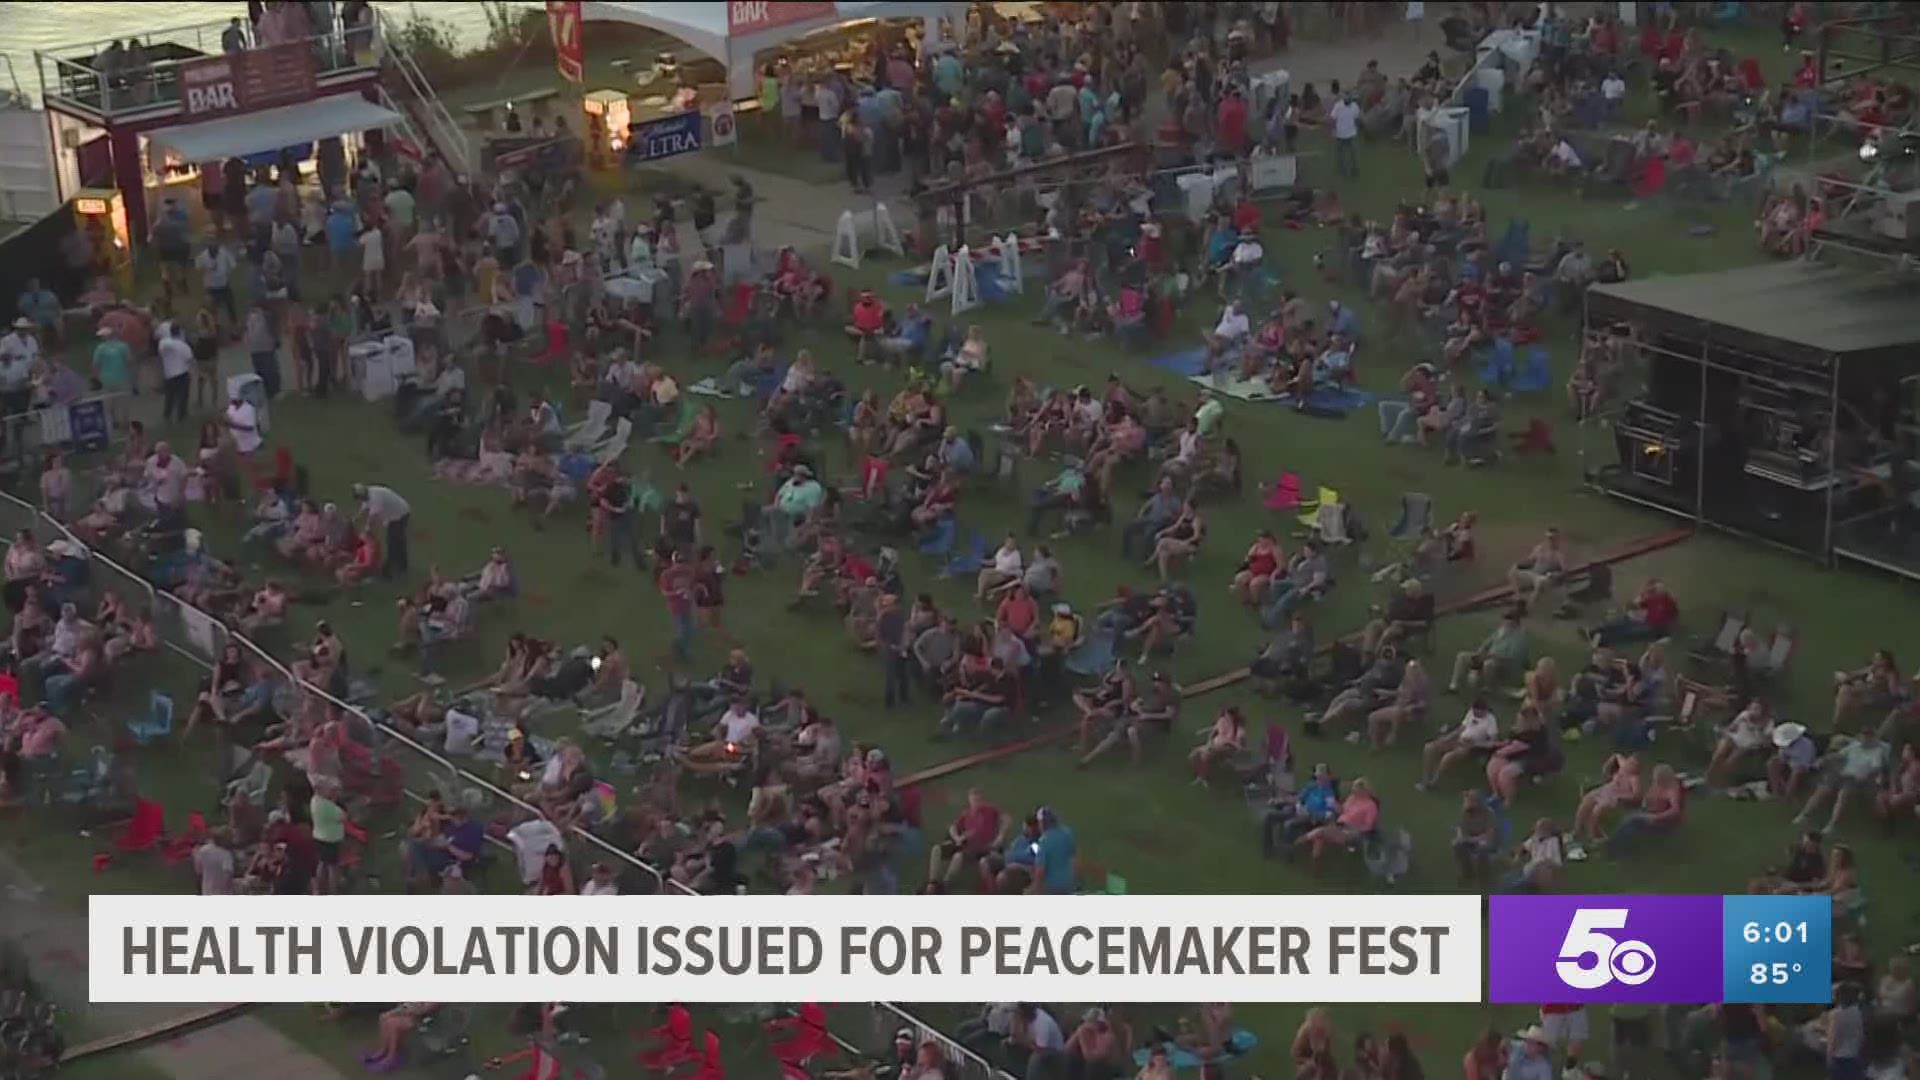 An ABC violation was issued to the Peacemaker Festival for failure to follow health department directives. https://bit.ly/39yl6yN